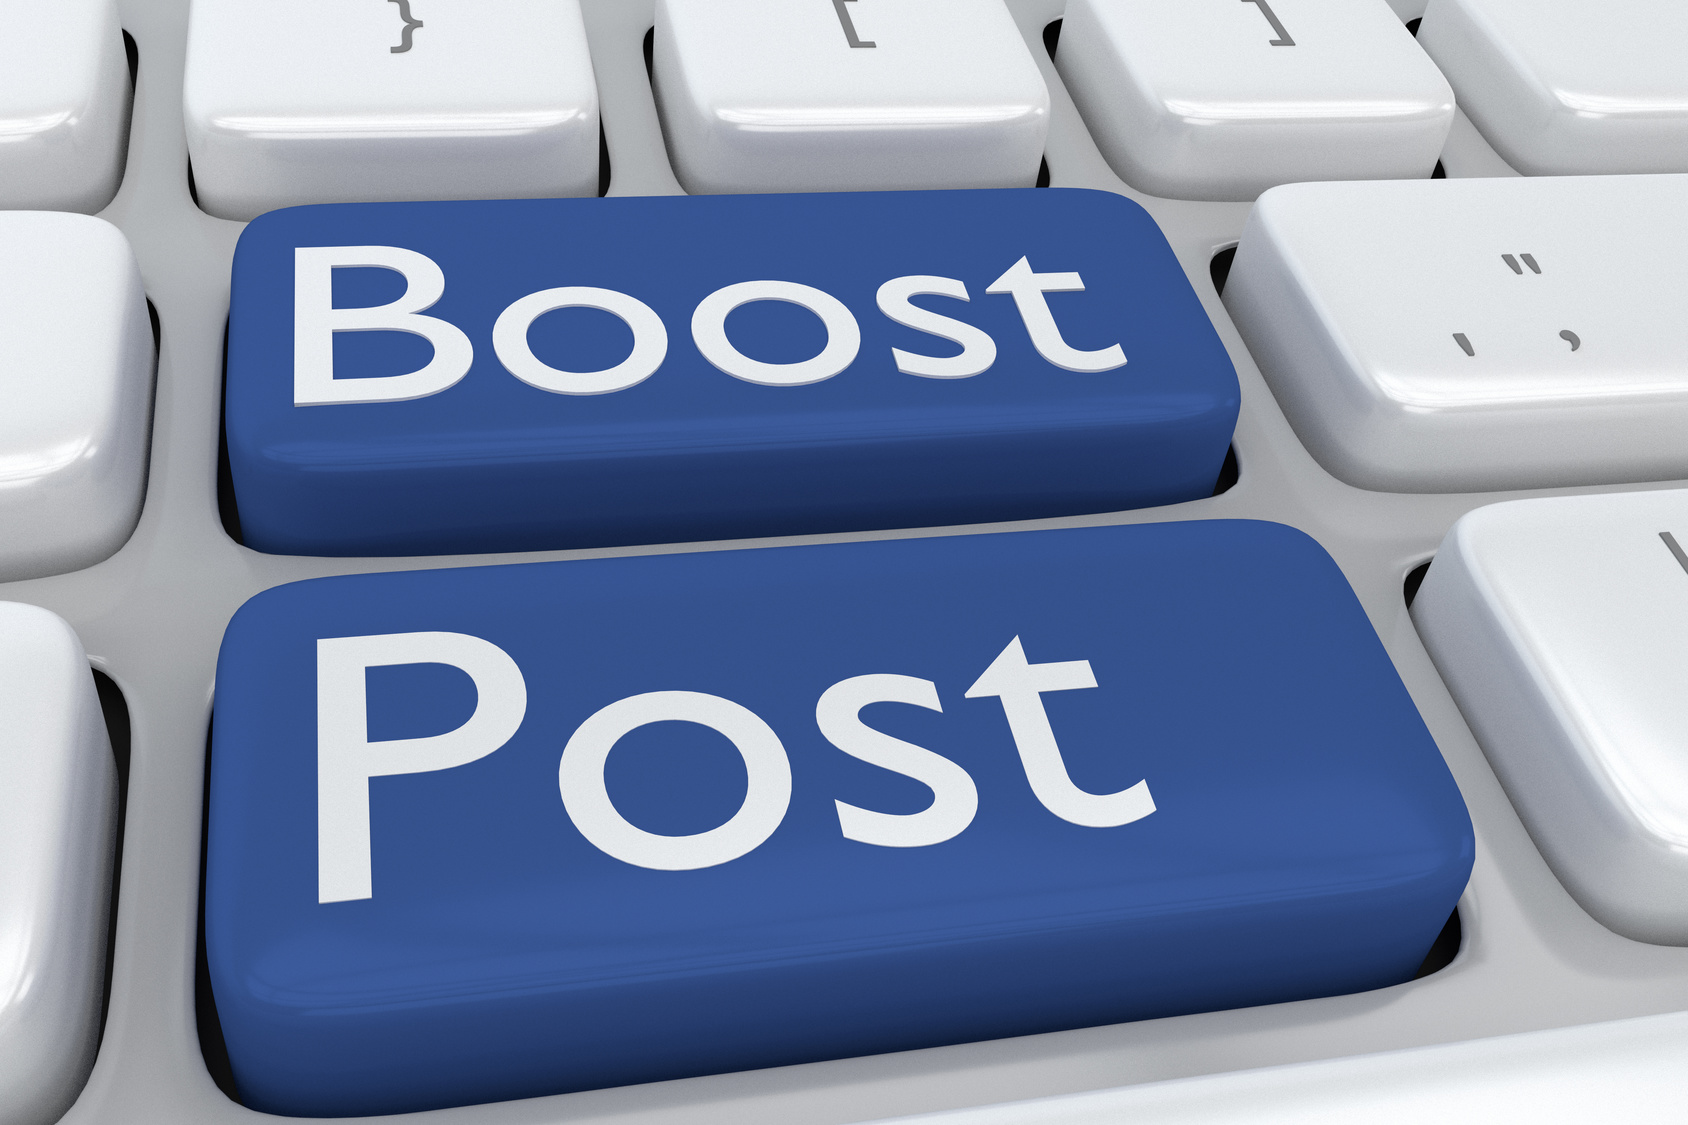 Boosted Facebook post and digital marketing in Melbourne Victoria australia